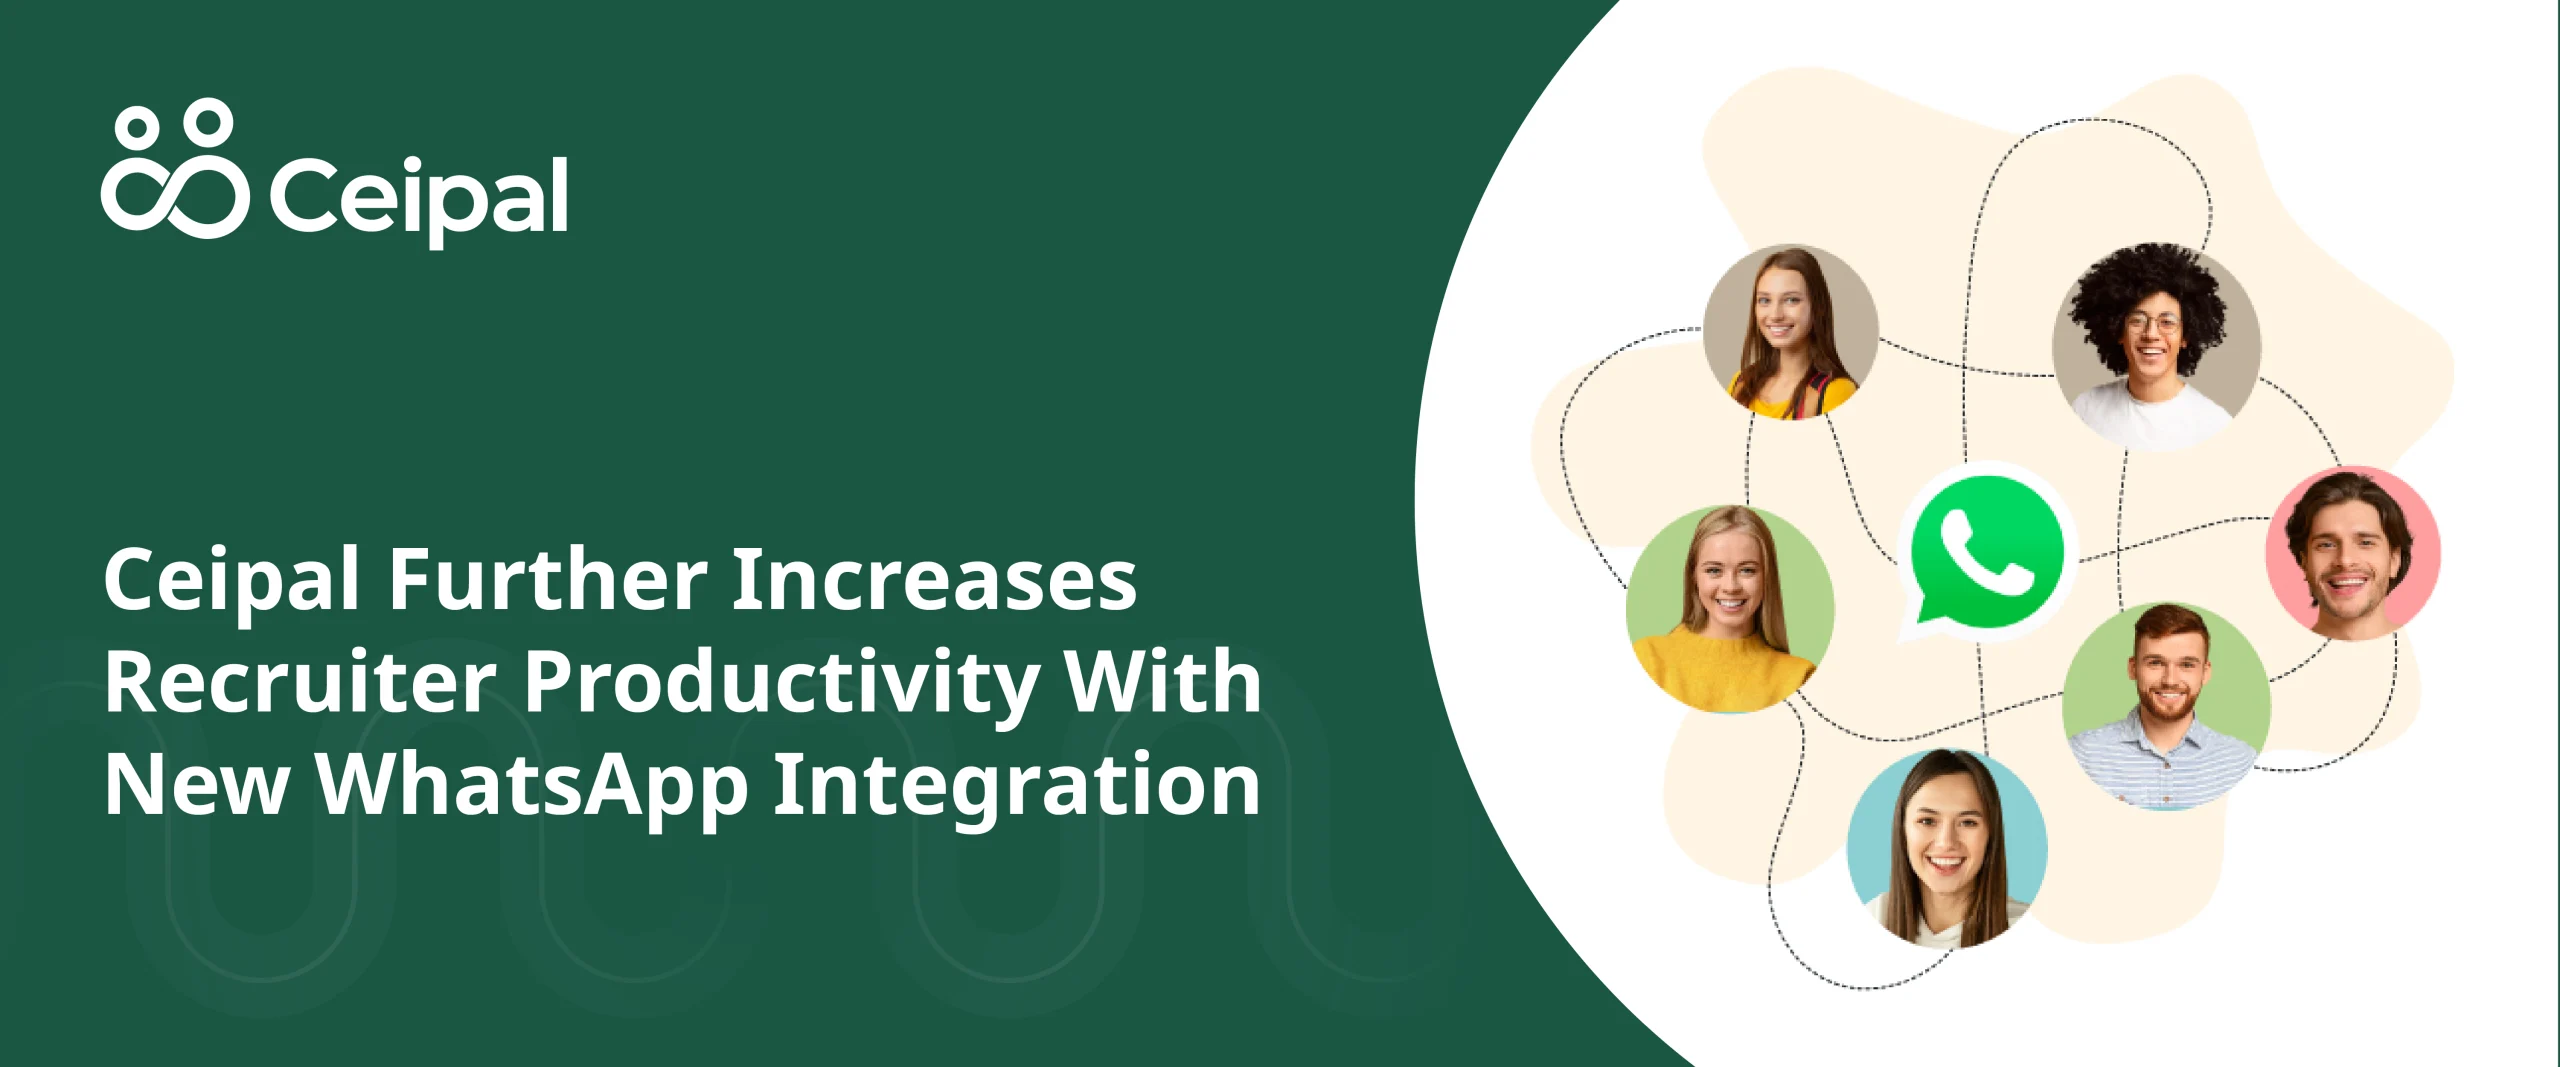 Ceipal Further Increases Recruiter Productivity With New WhatsApp Integration￼